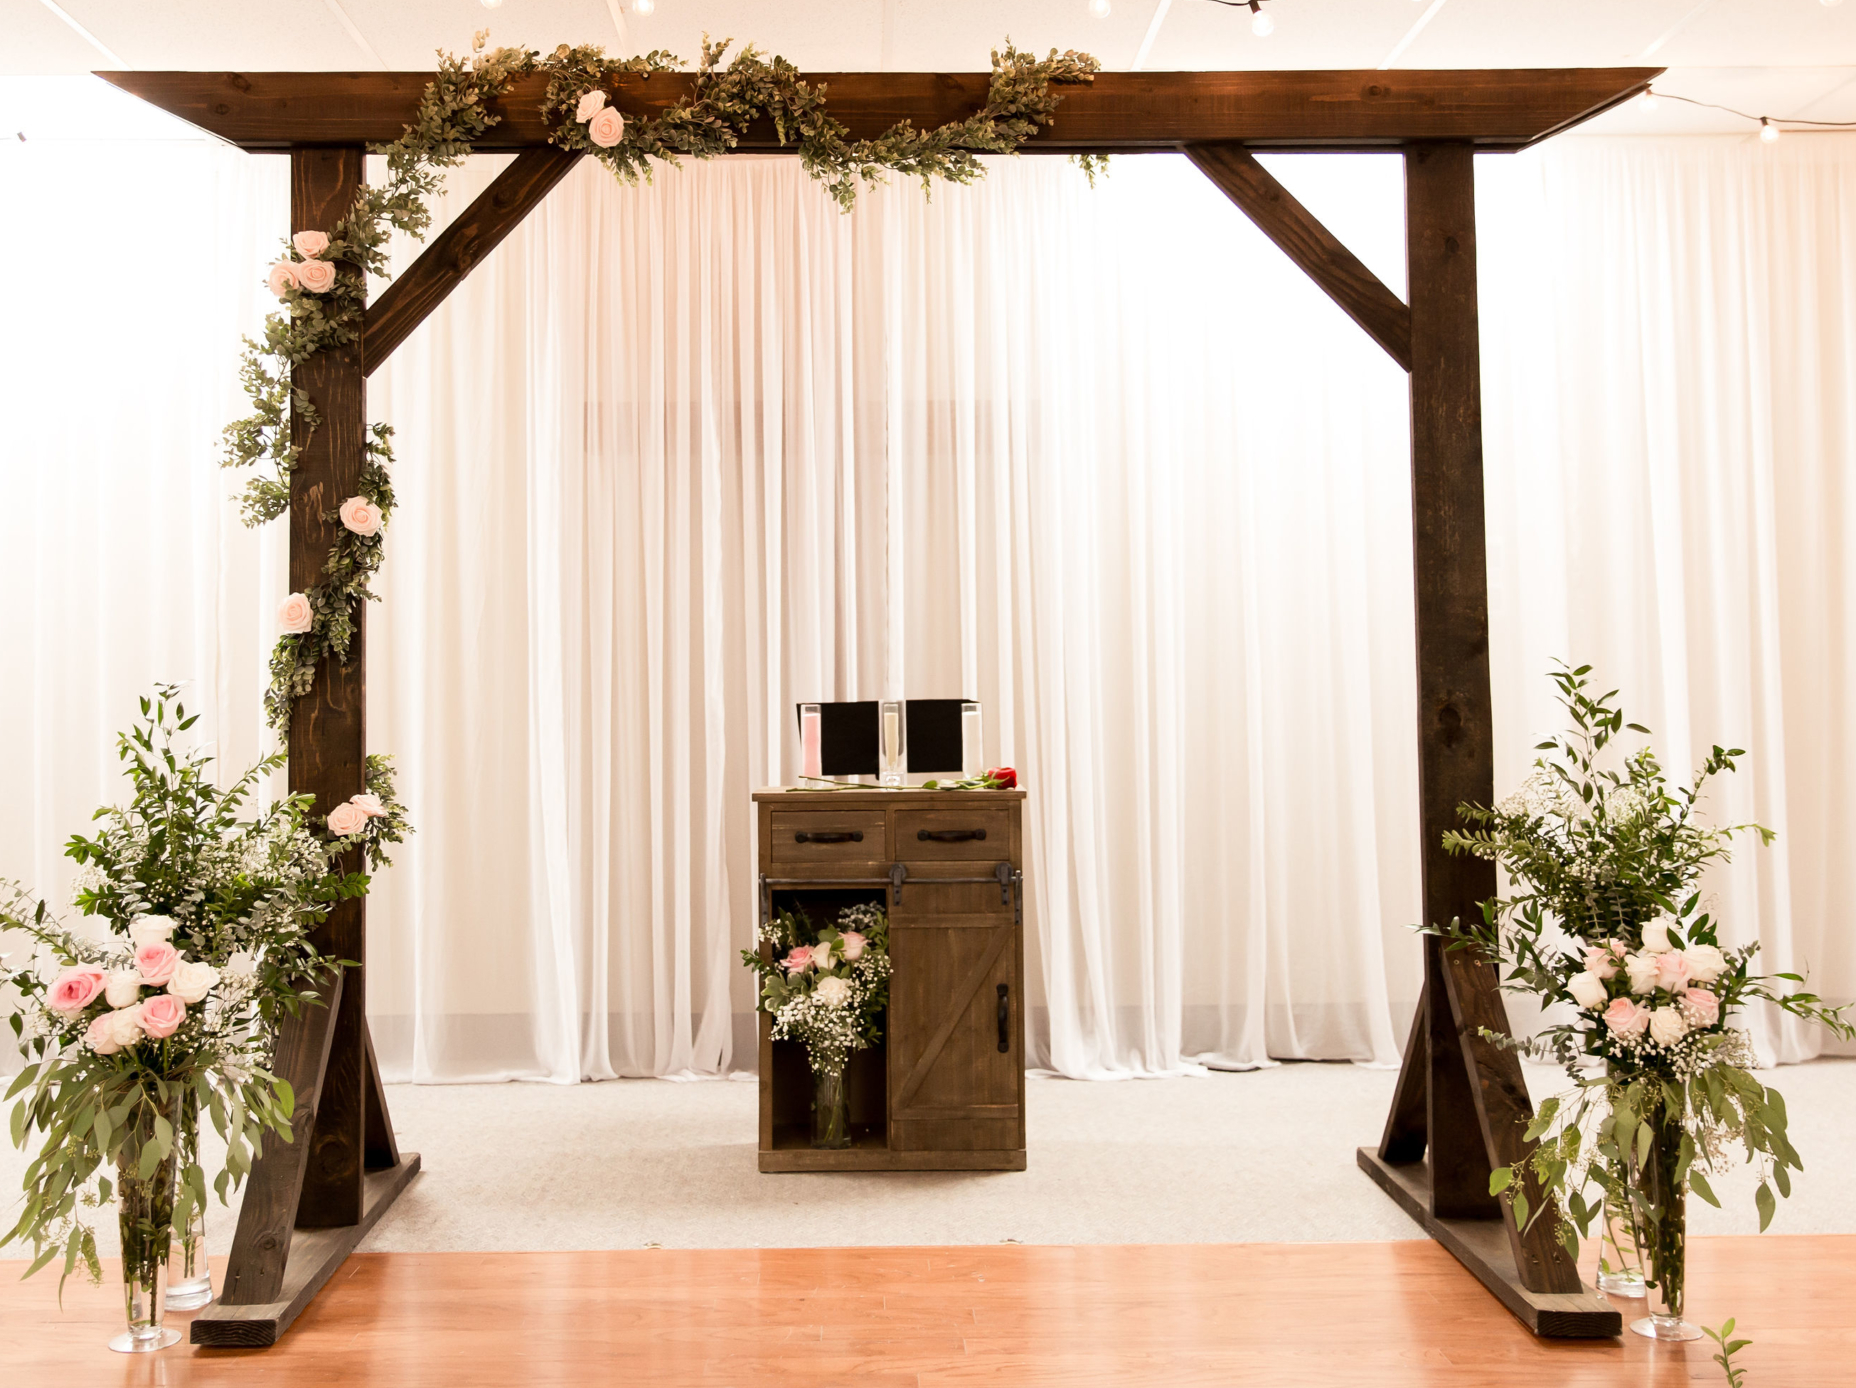 What Do You Decorate a Wedding Arch With